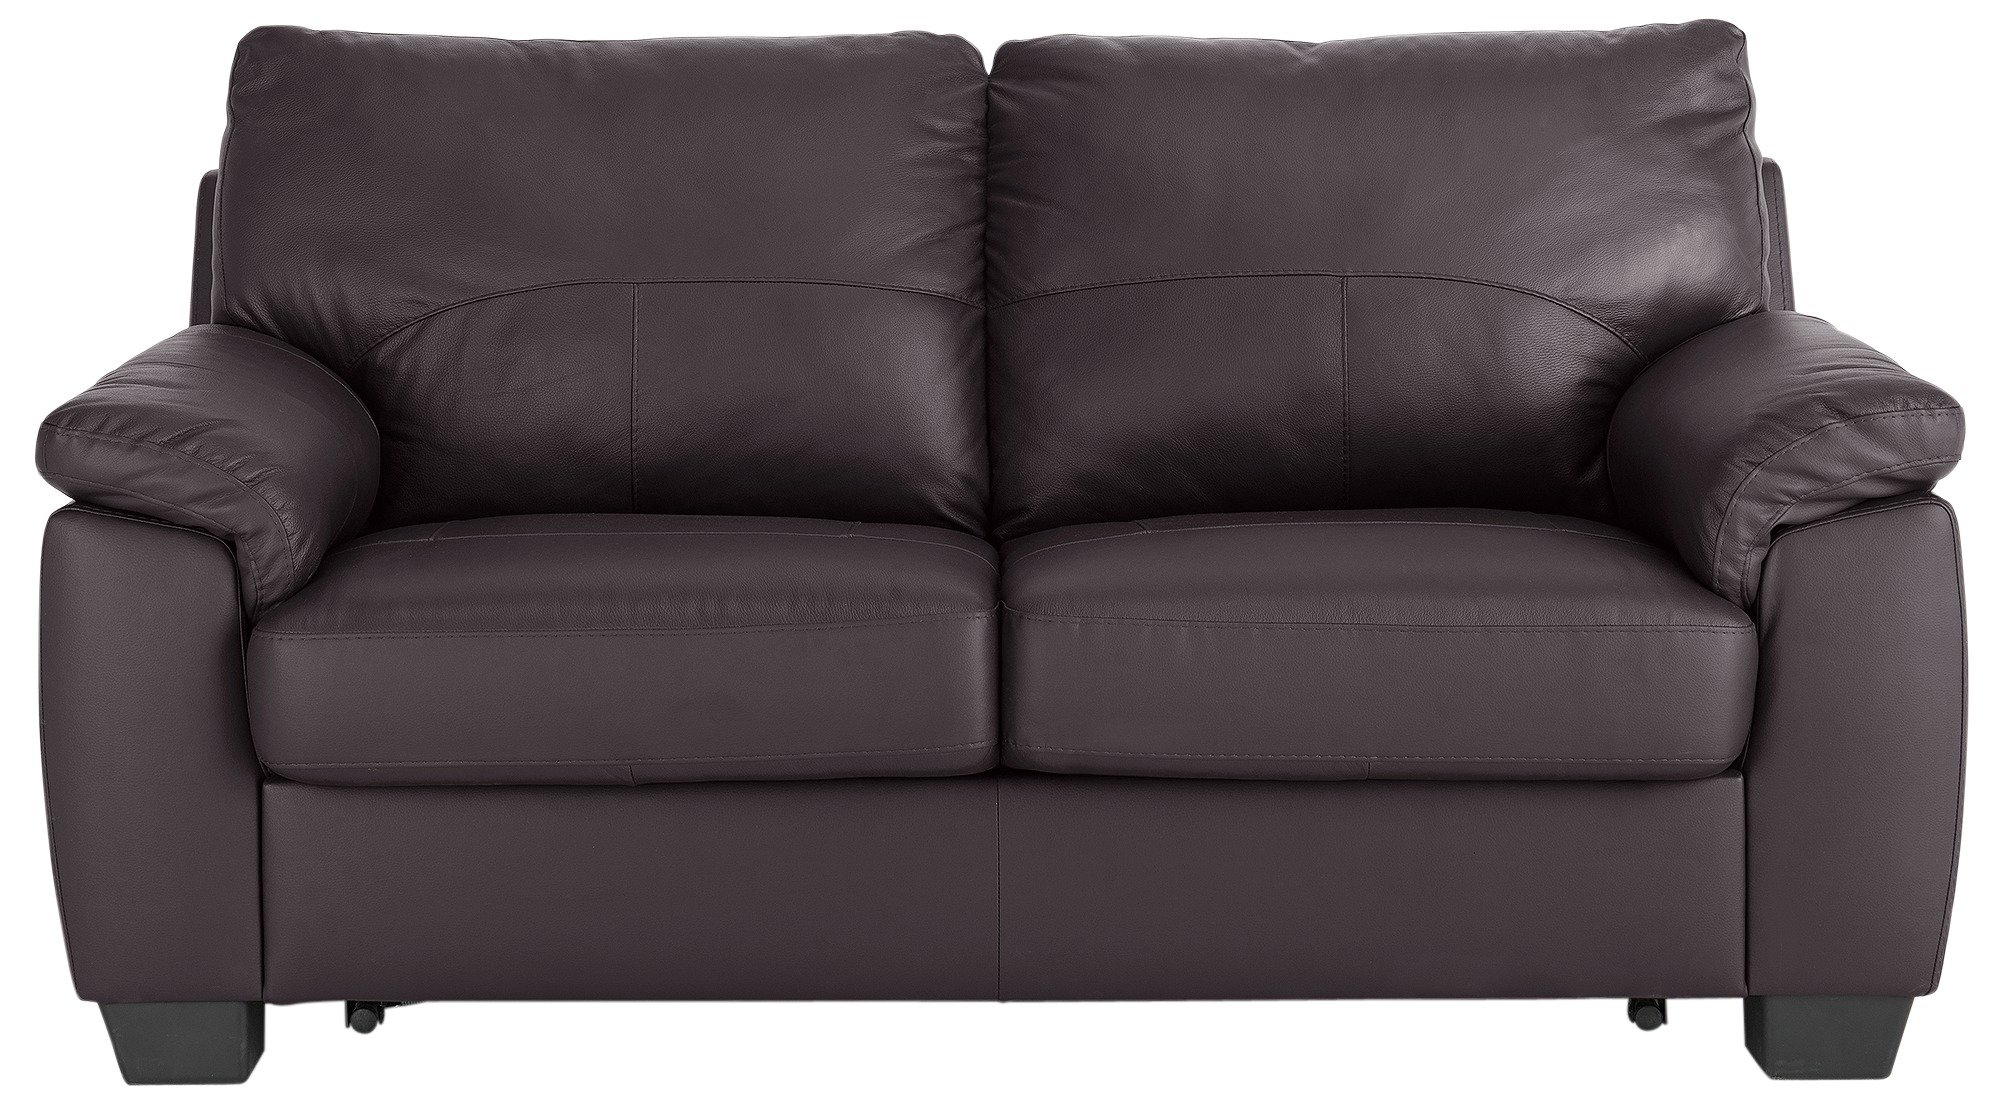 Argos Home Logan 2 Seater Faux Leather Sofa Bed - Chocolate